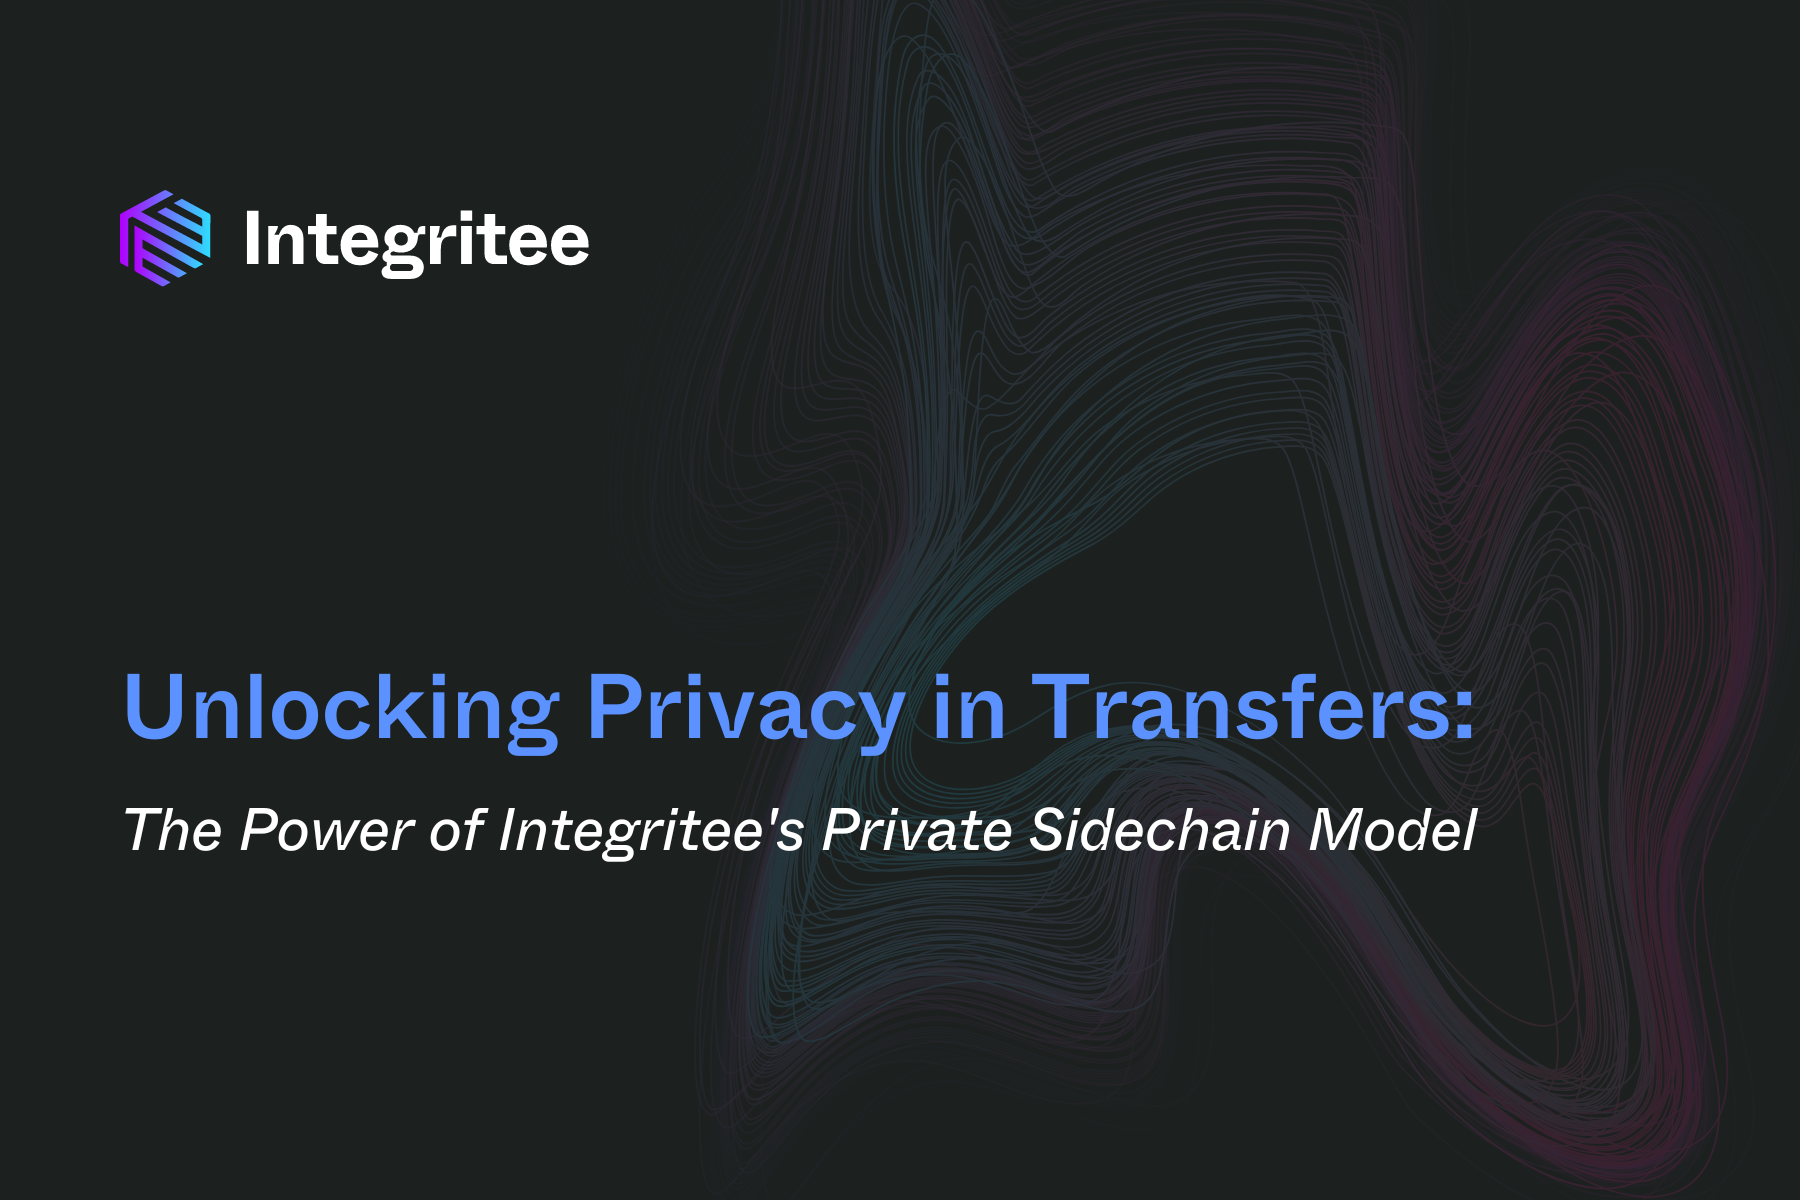 Unlocking Privacy in Transfers: The Power of Integritee’s Private Sidechain Model